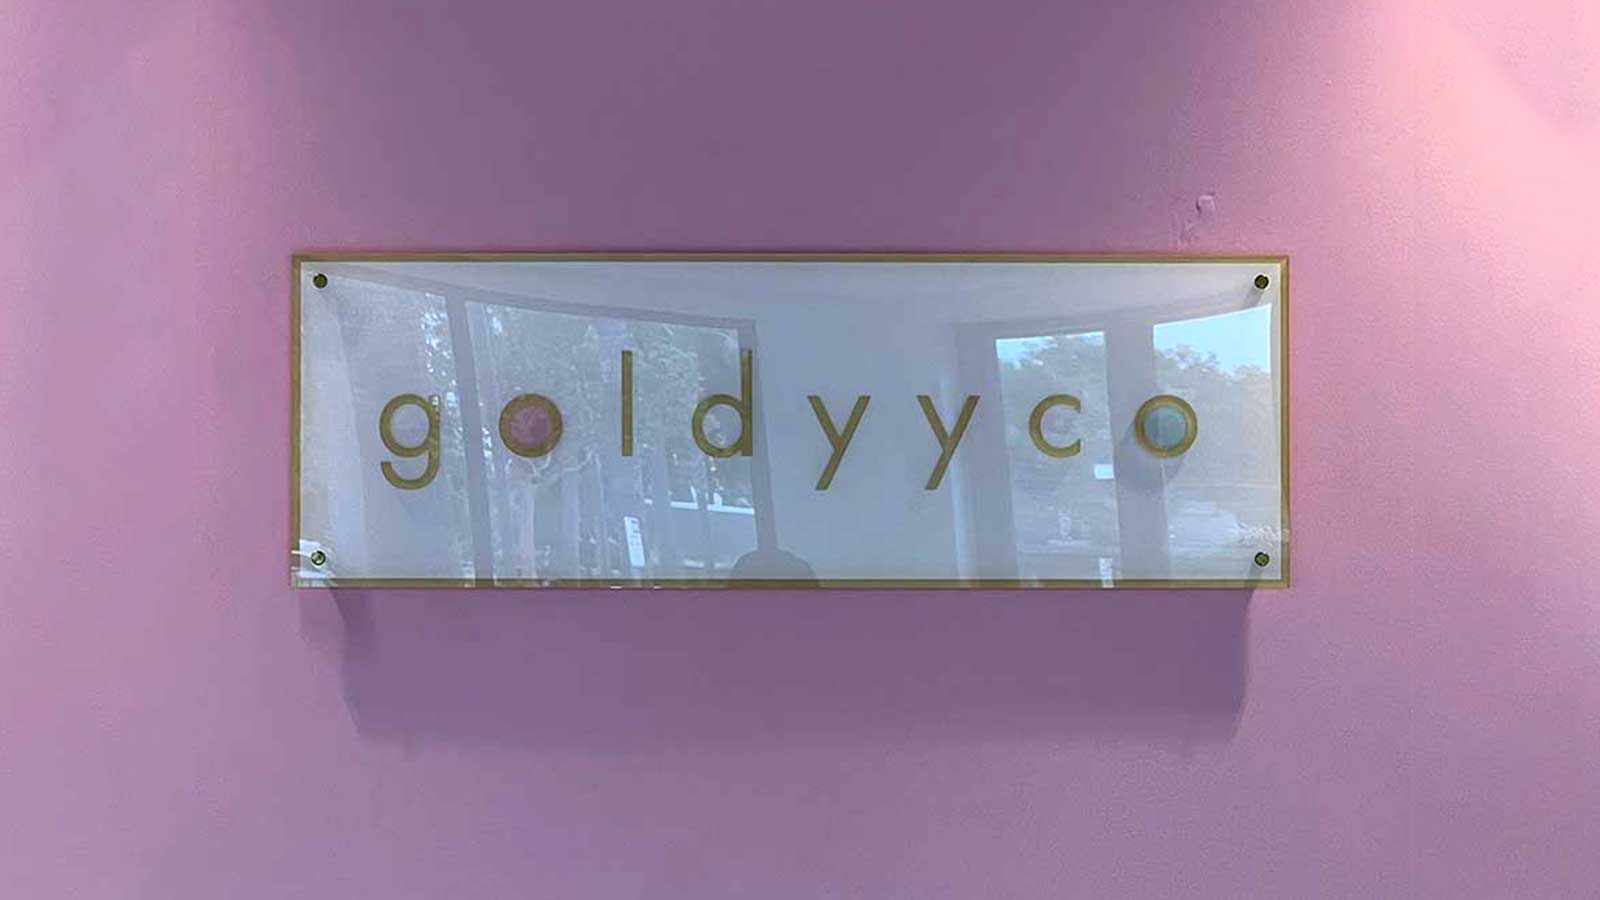 Goldyyco acrylic sign attached to the wall